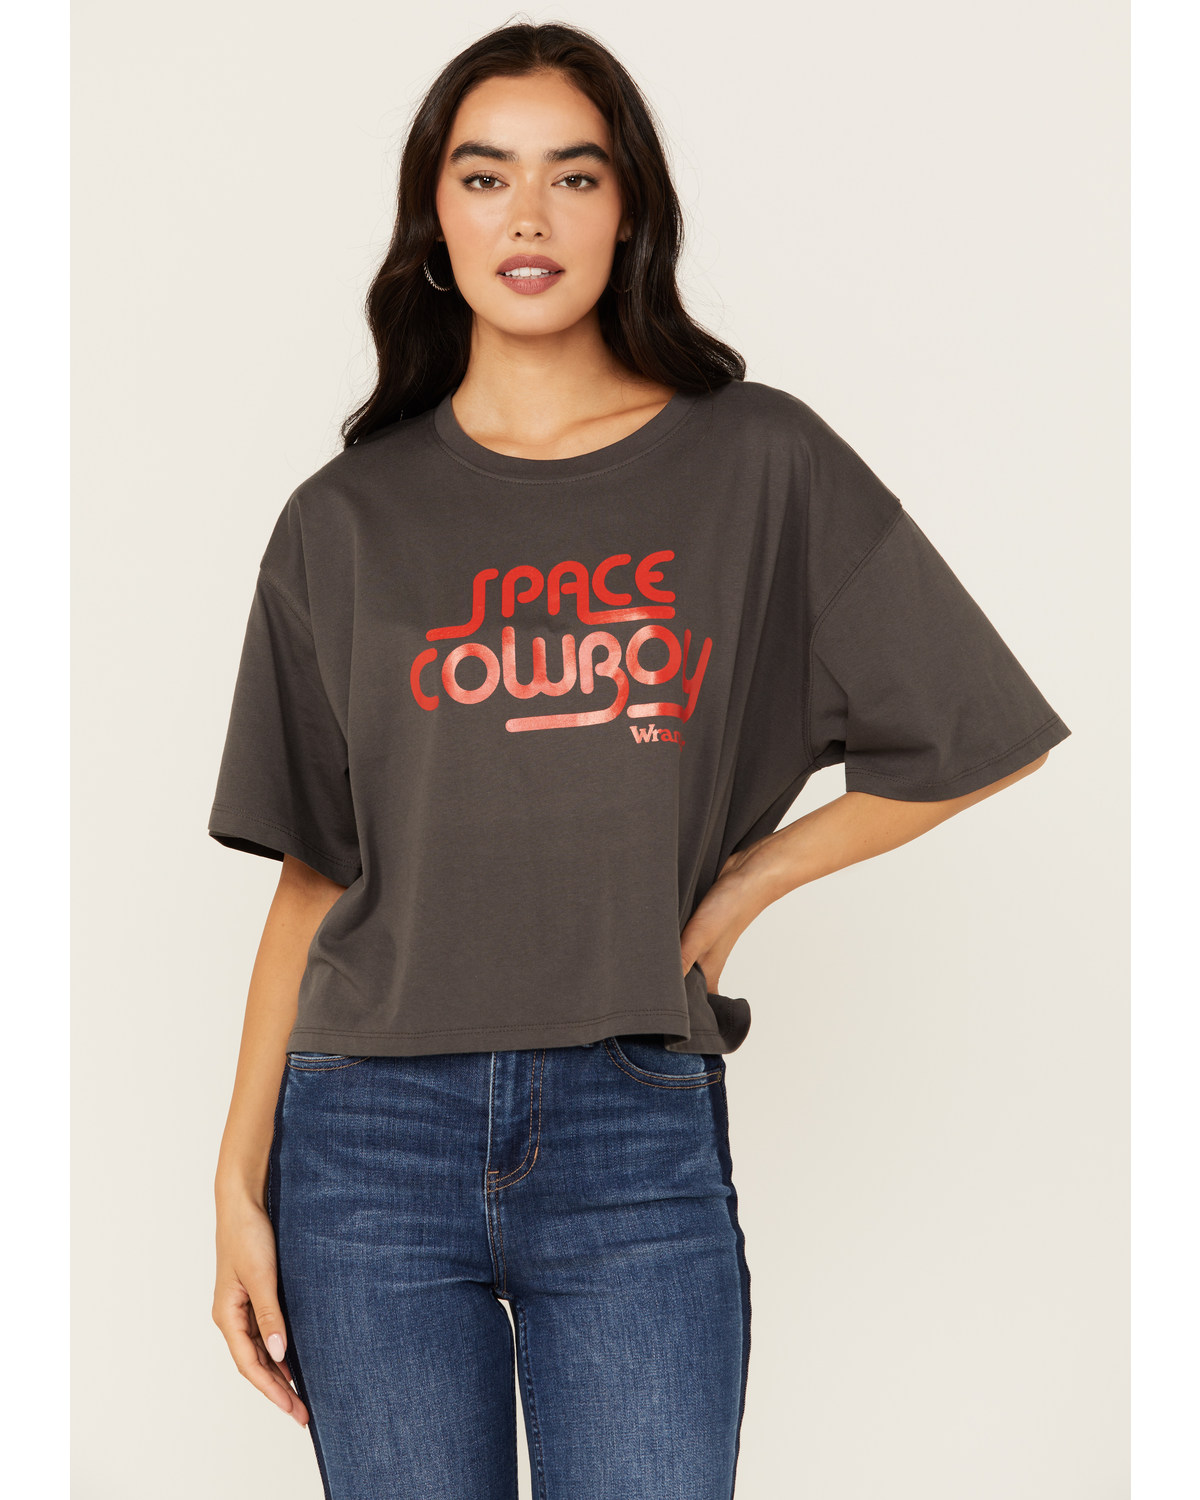 Wrangler Women's Space Cowboy Boxy Cropped Graphic Tee